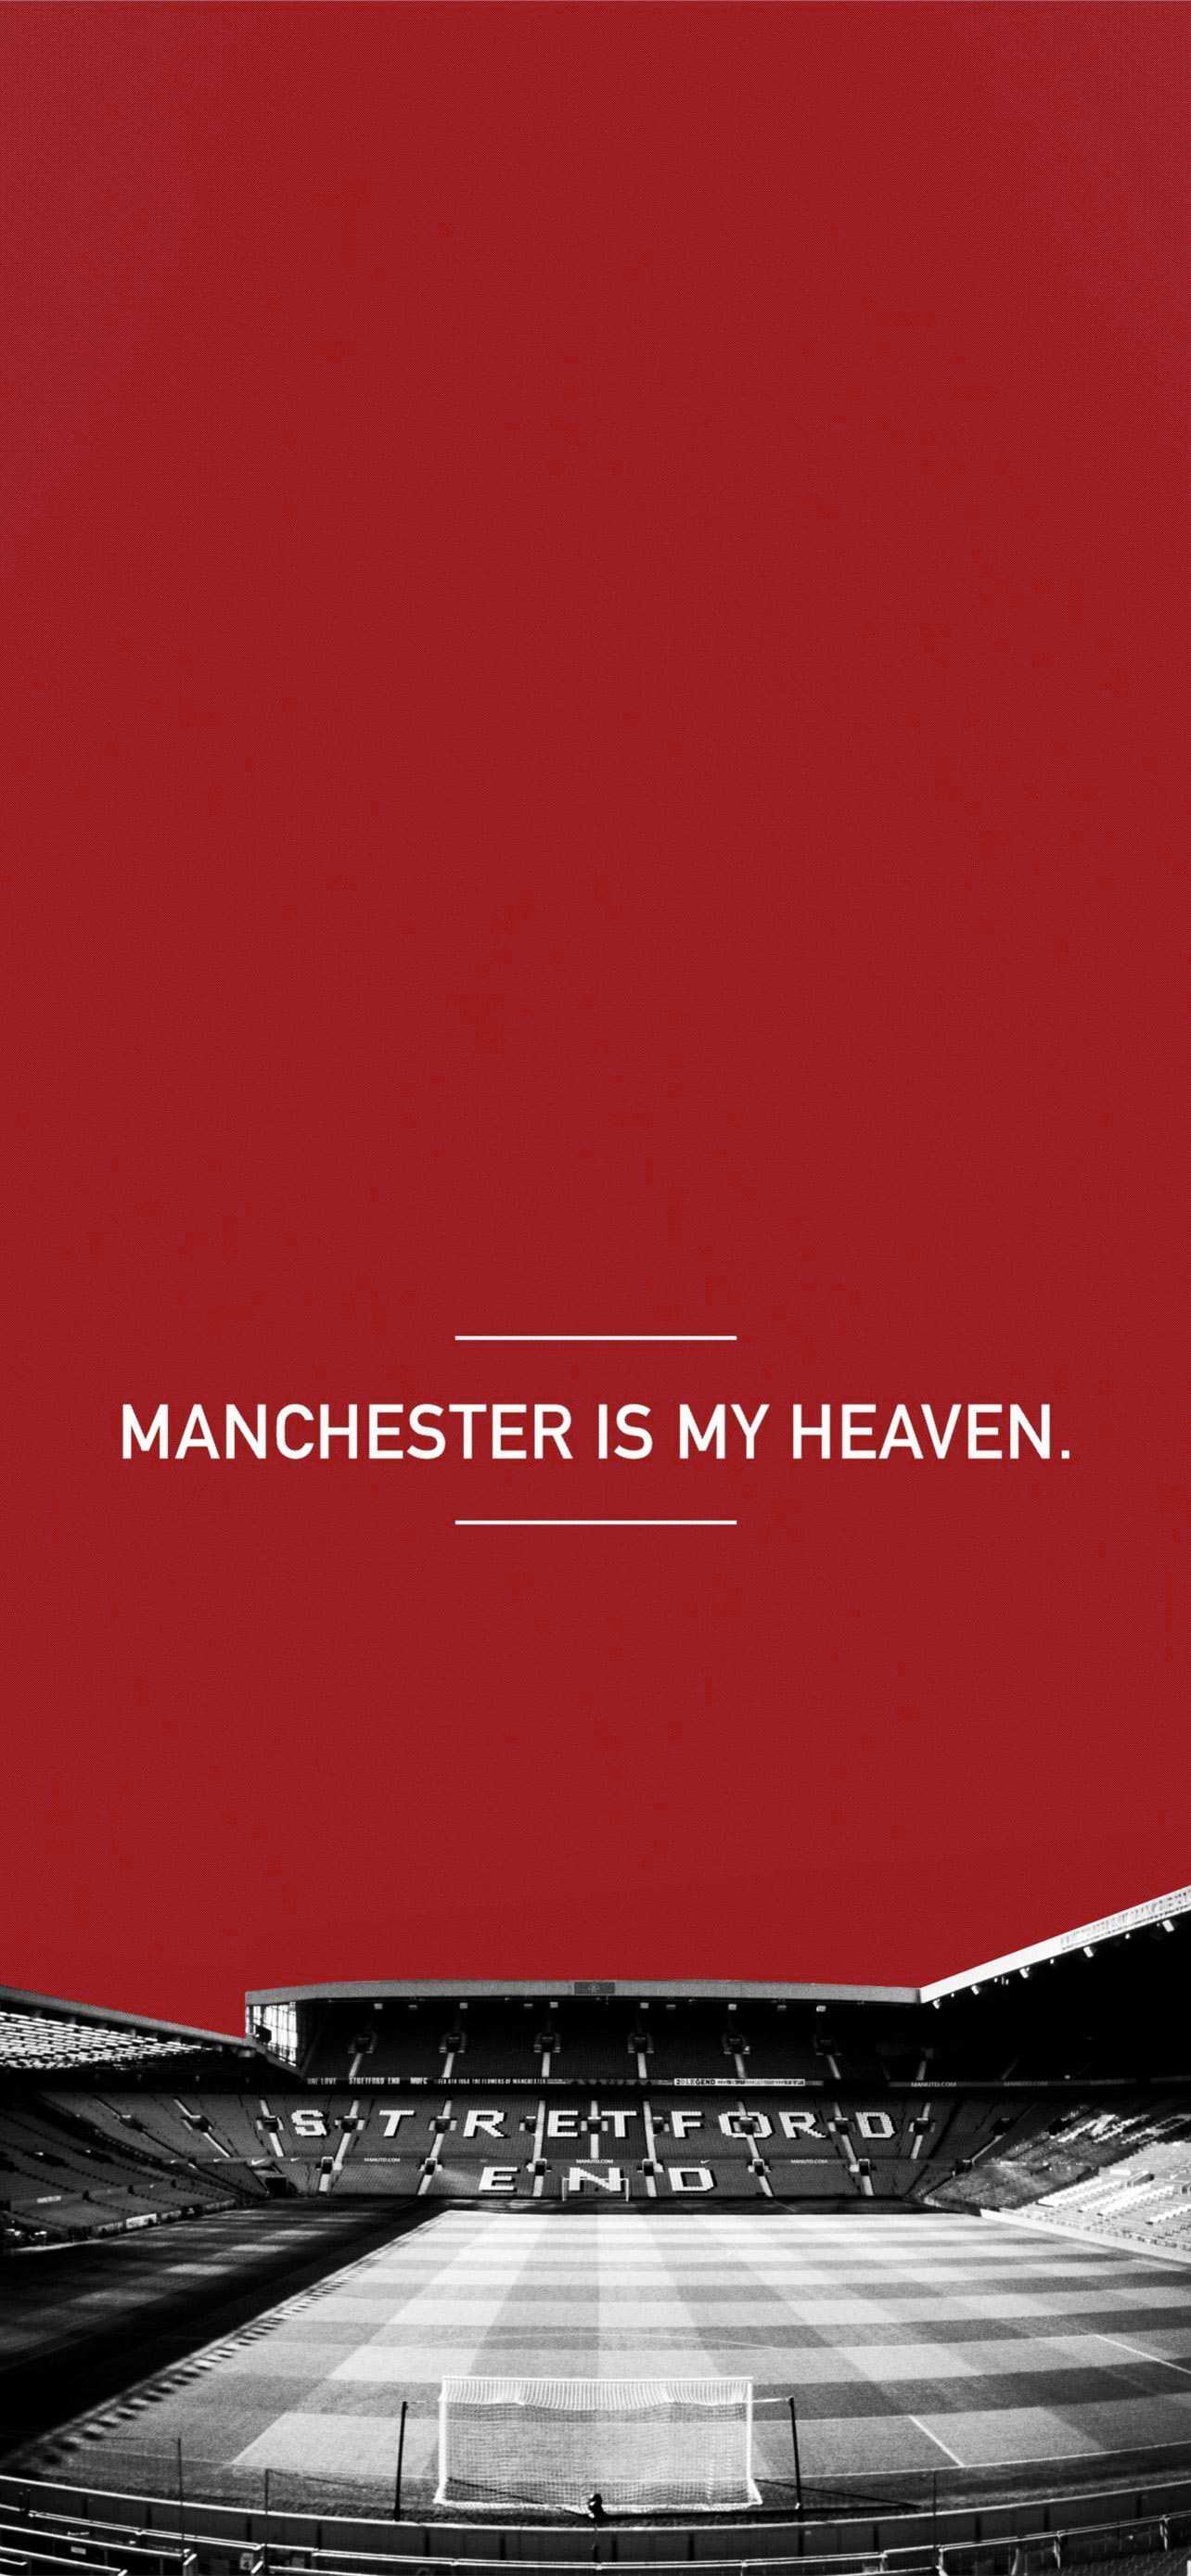 Manchester United Wallpaper - iXpap  Manchester united wallpaper,  Manchester united, Manchester united old trafford